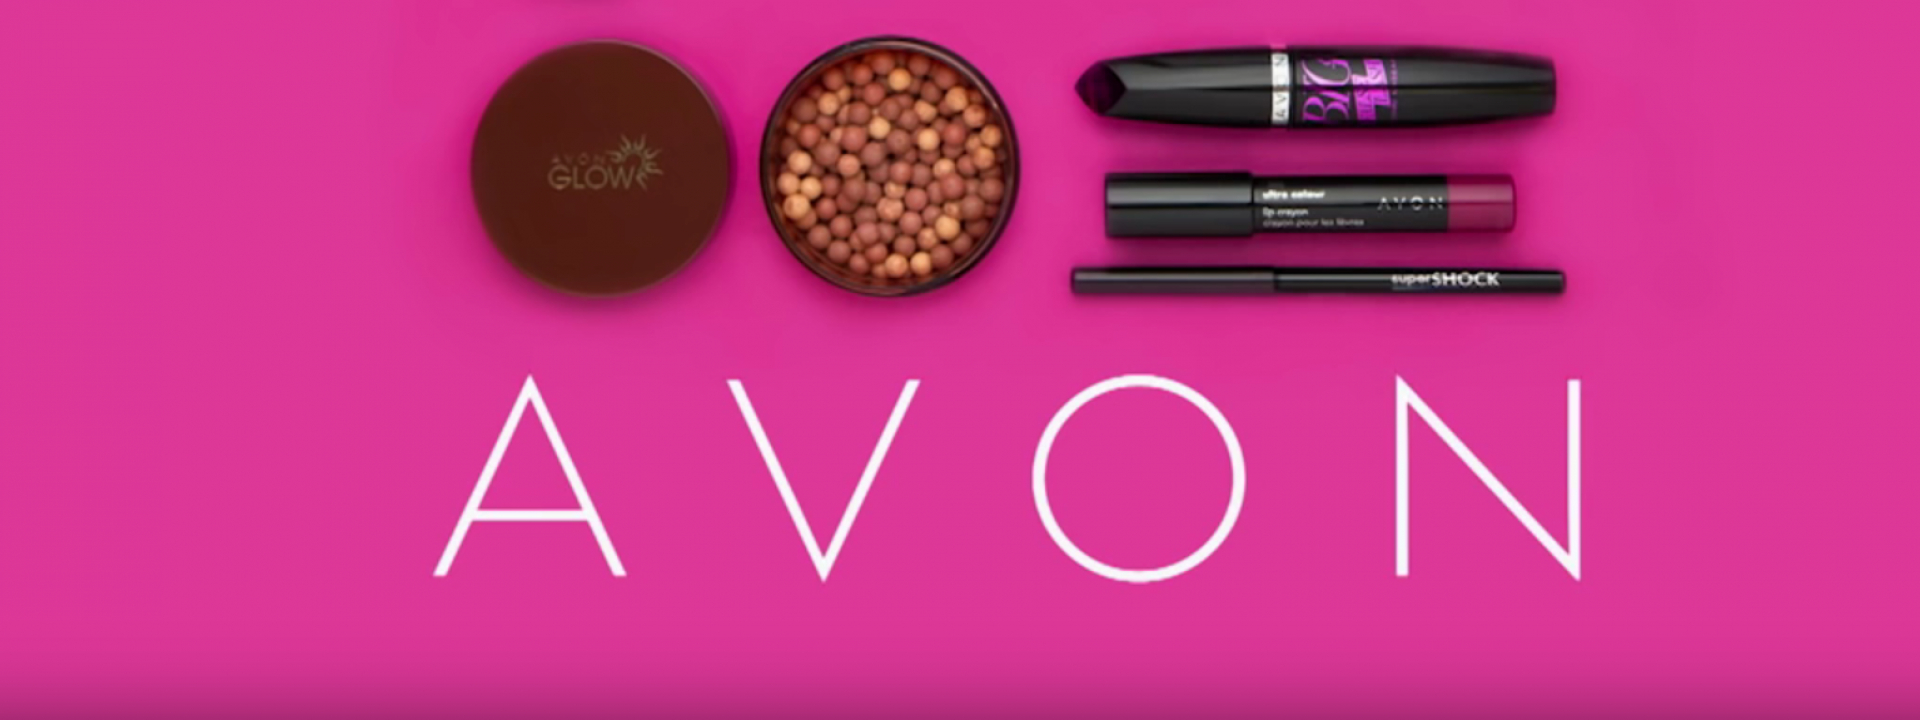 Pink background with Avon branded makeup products